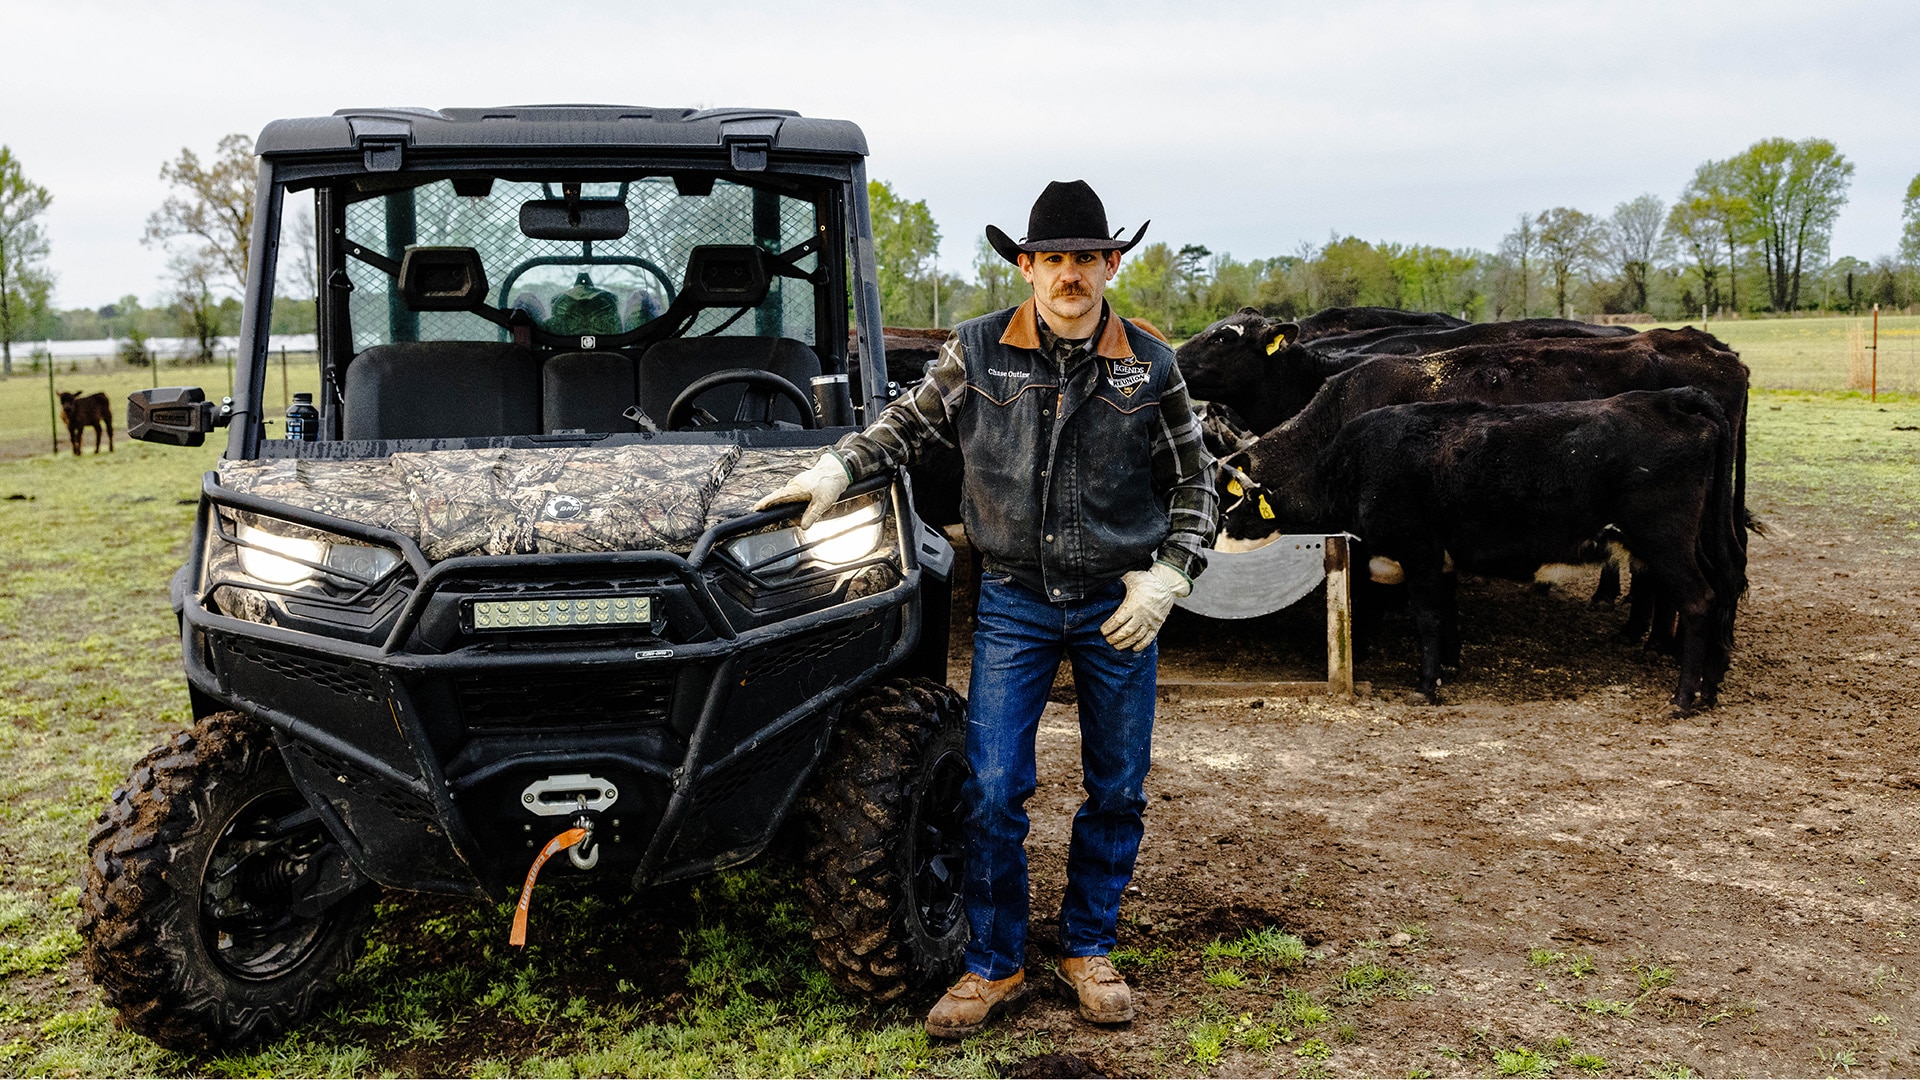 Multi-time champion bull rider Chase Outlaw next to his Can-Am SxS Defender